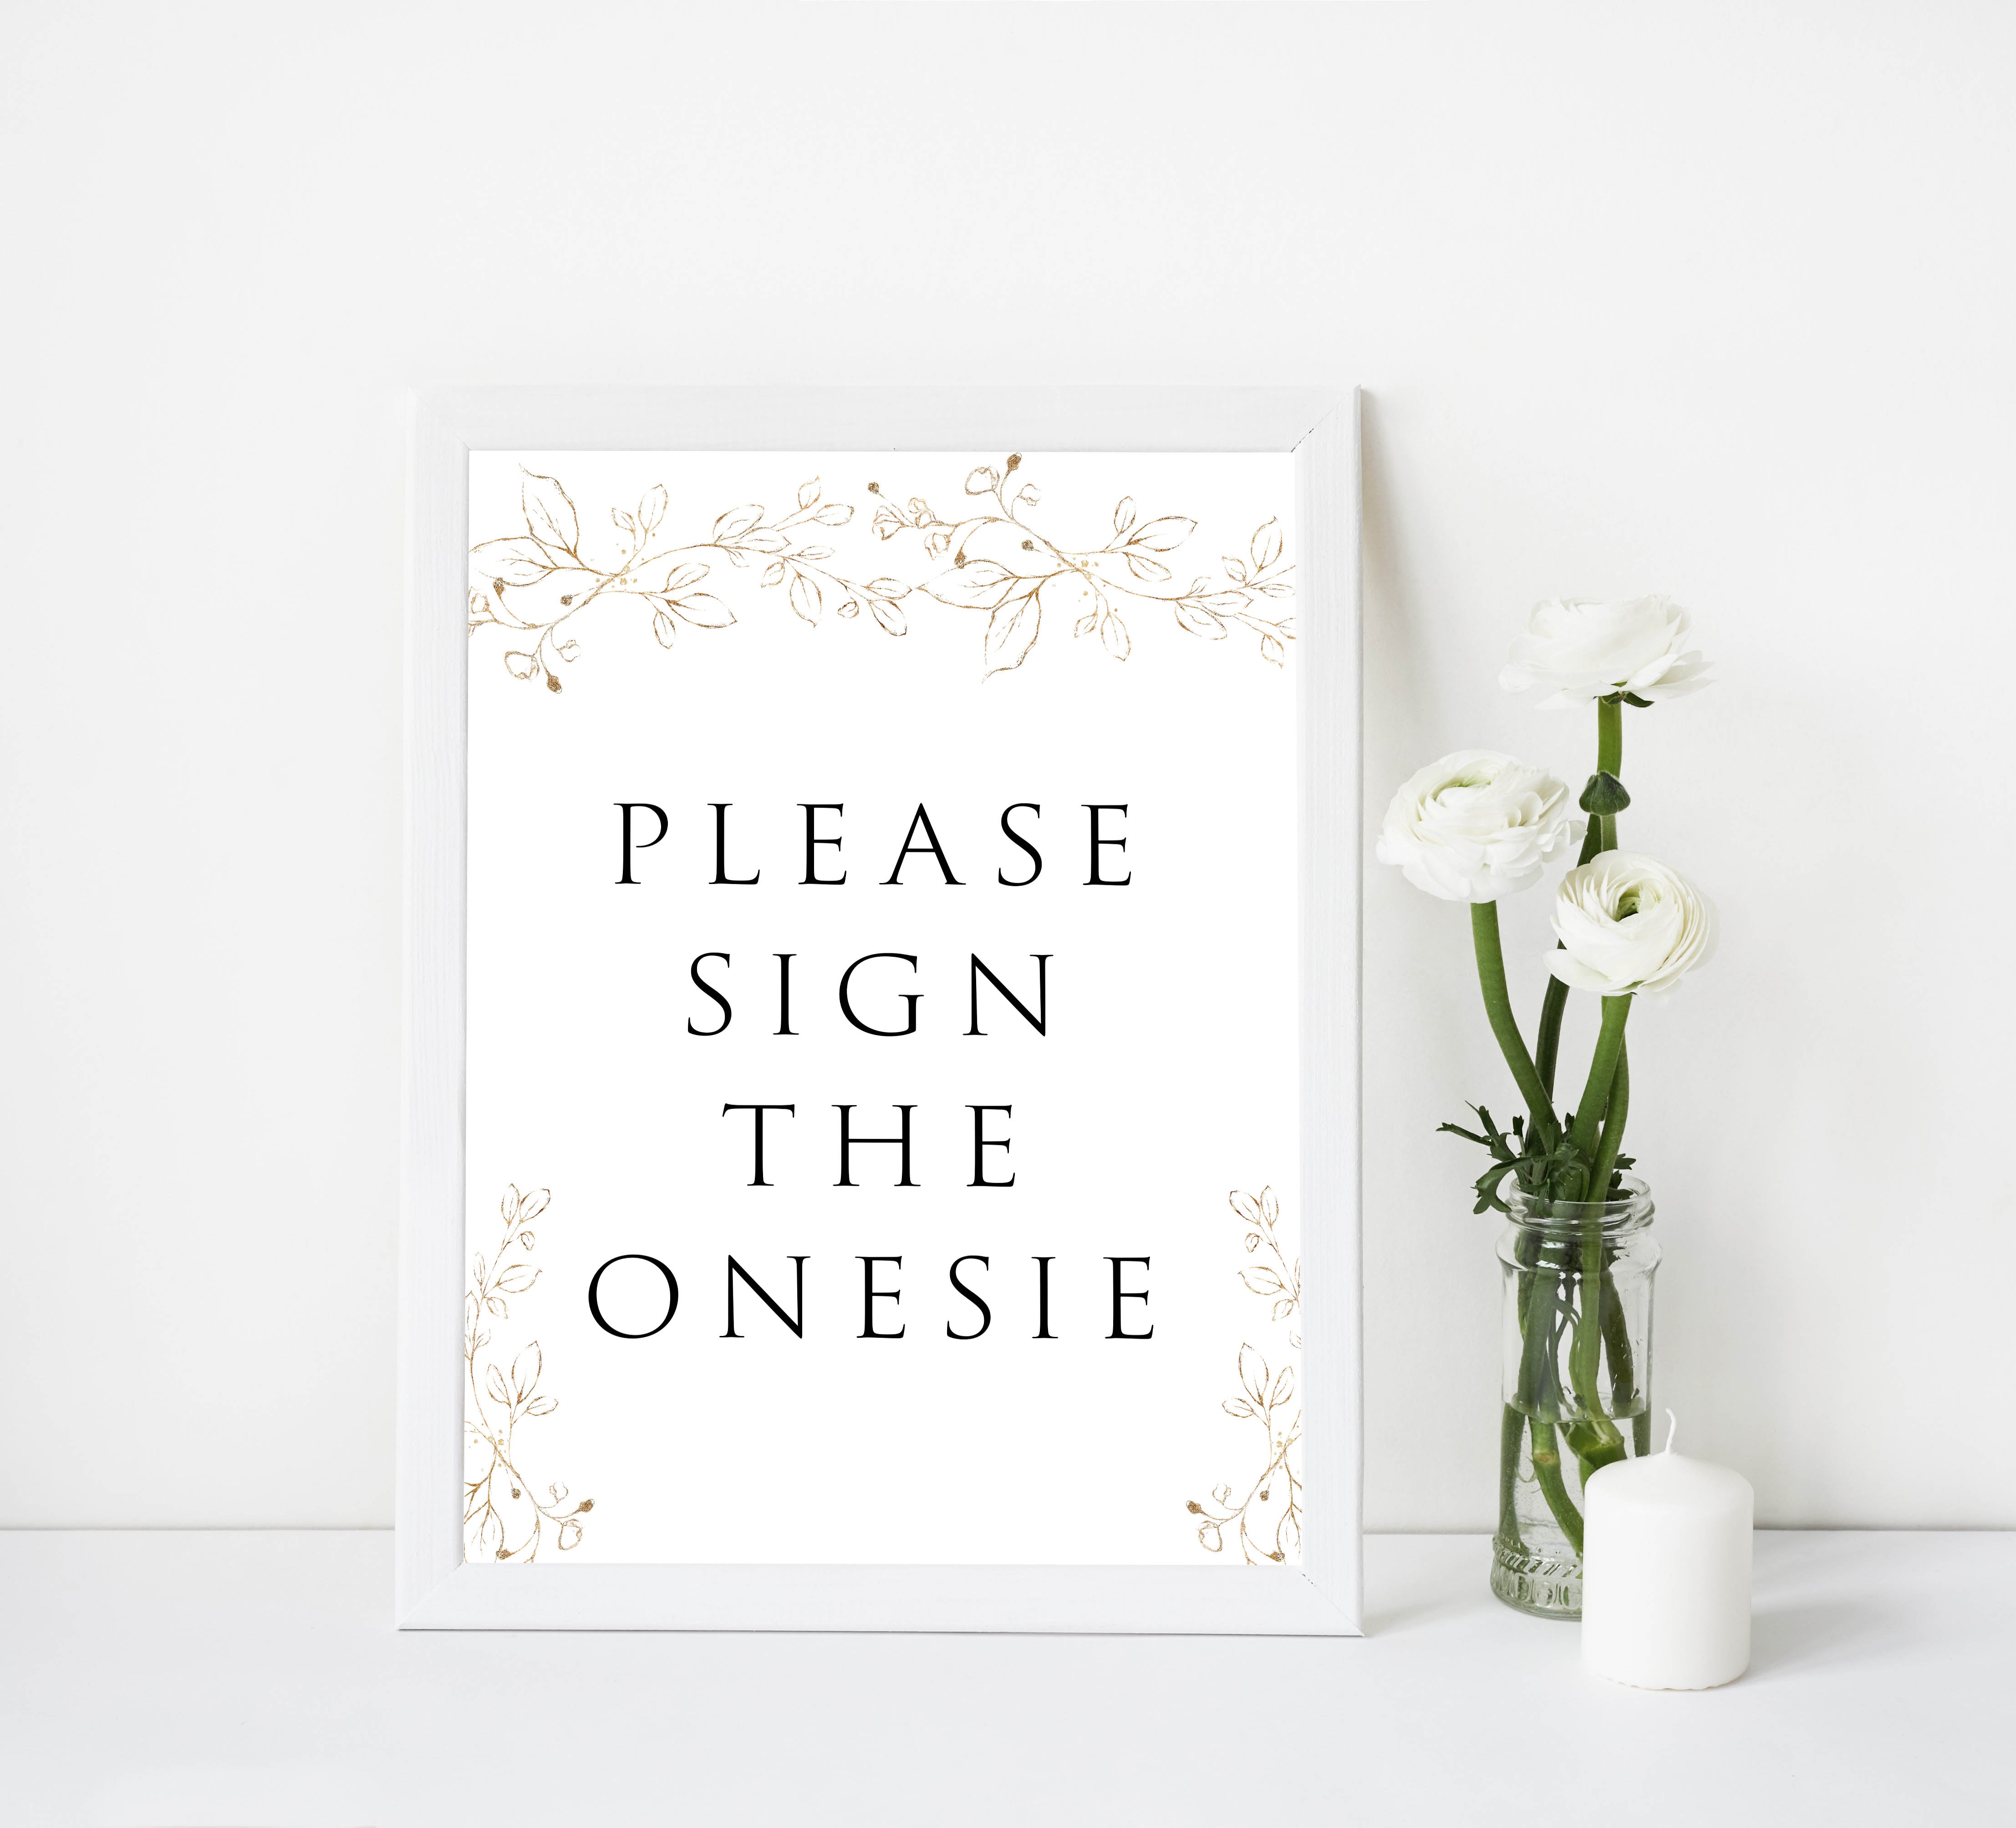 please sign the onesie baby game, Printable baby shower games, gold leaf baby games, baby shower games, fun baby shower ideas, top baby shower ideas, gold leaf baby shower, baby shower games, fun gold leaf baby shower ideas